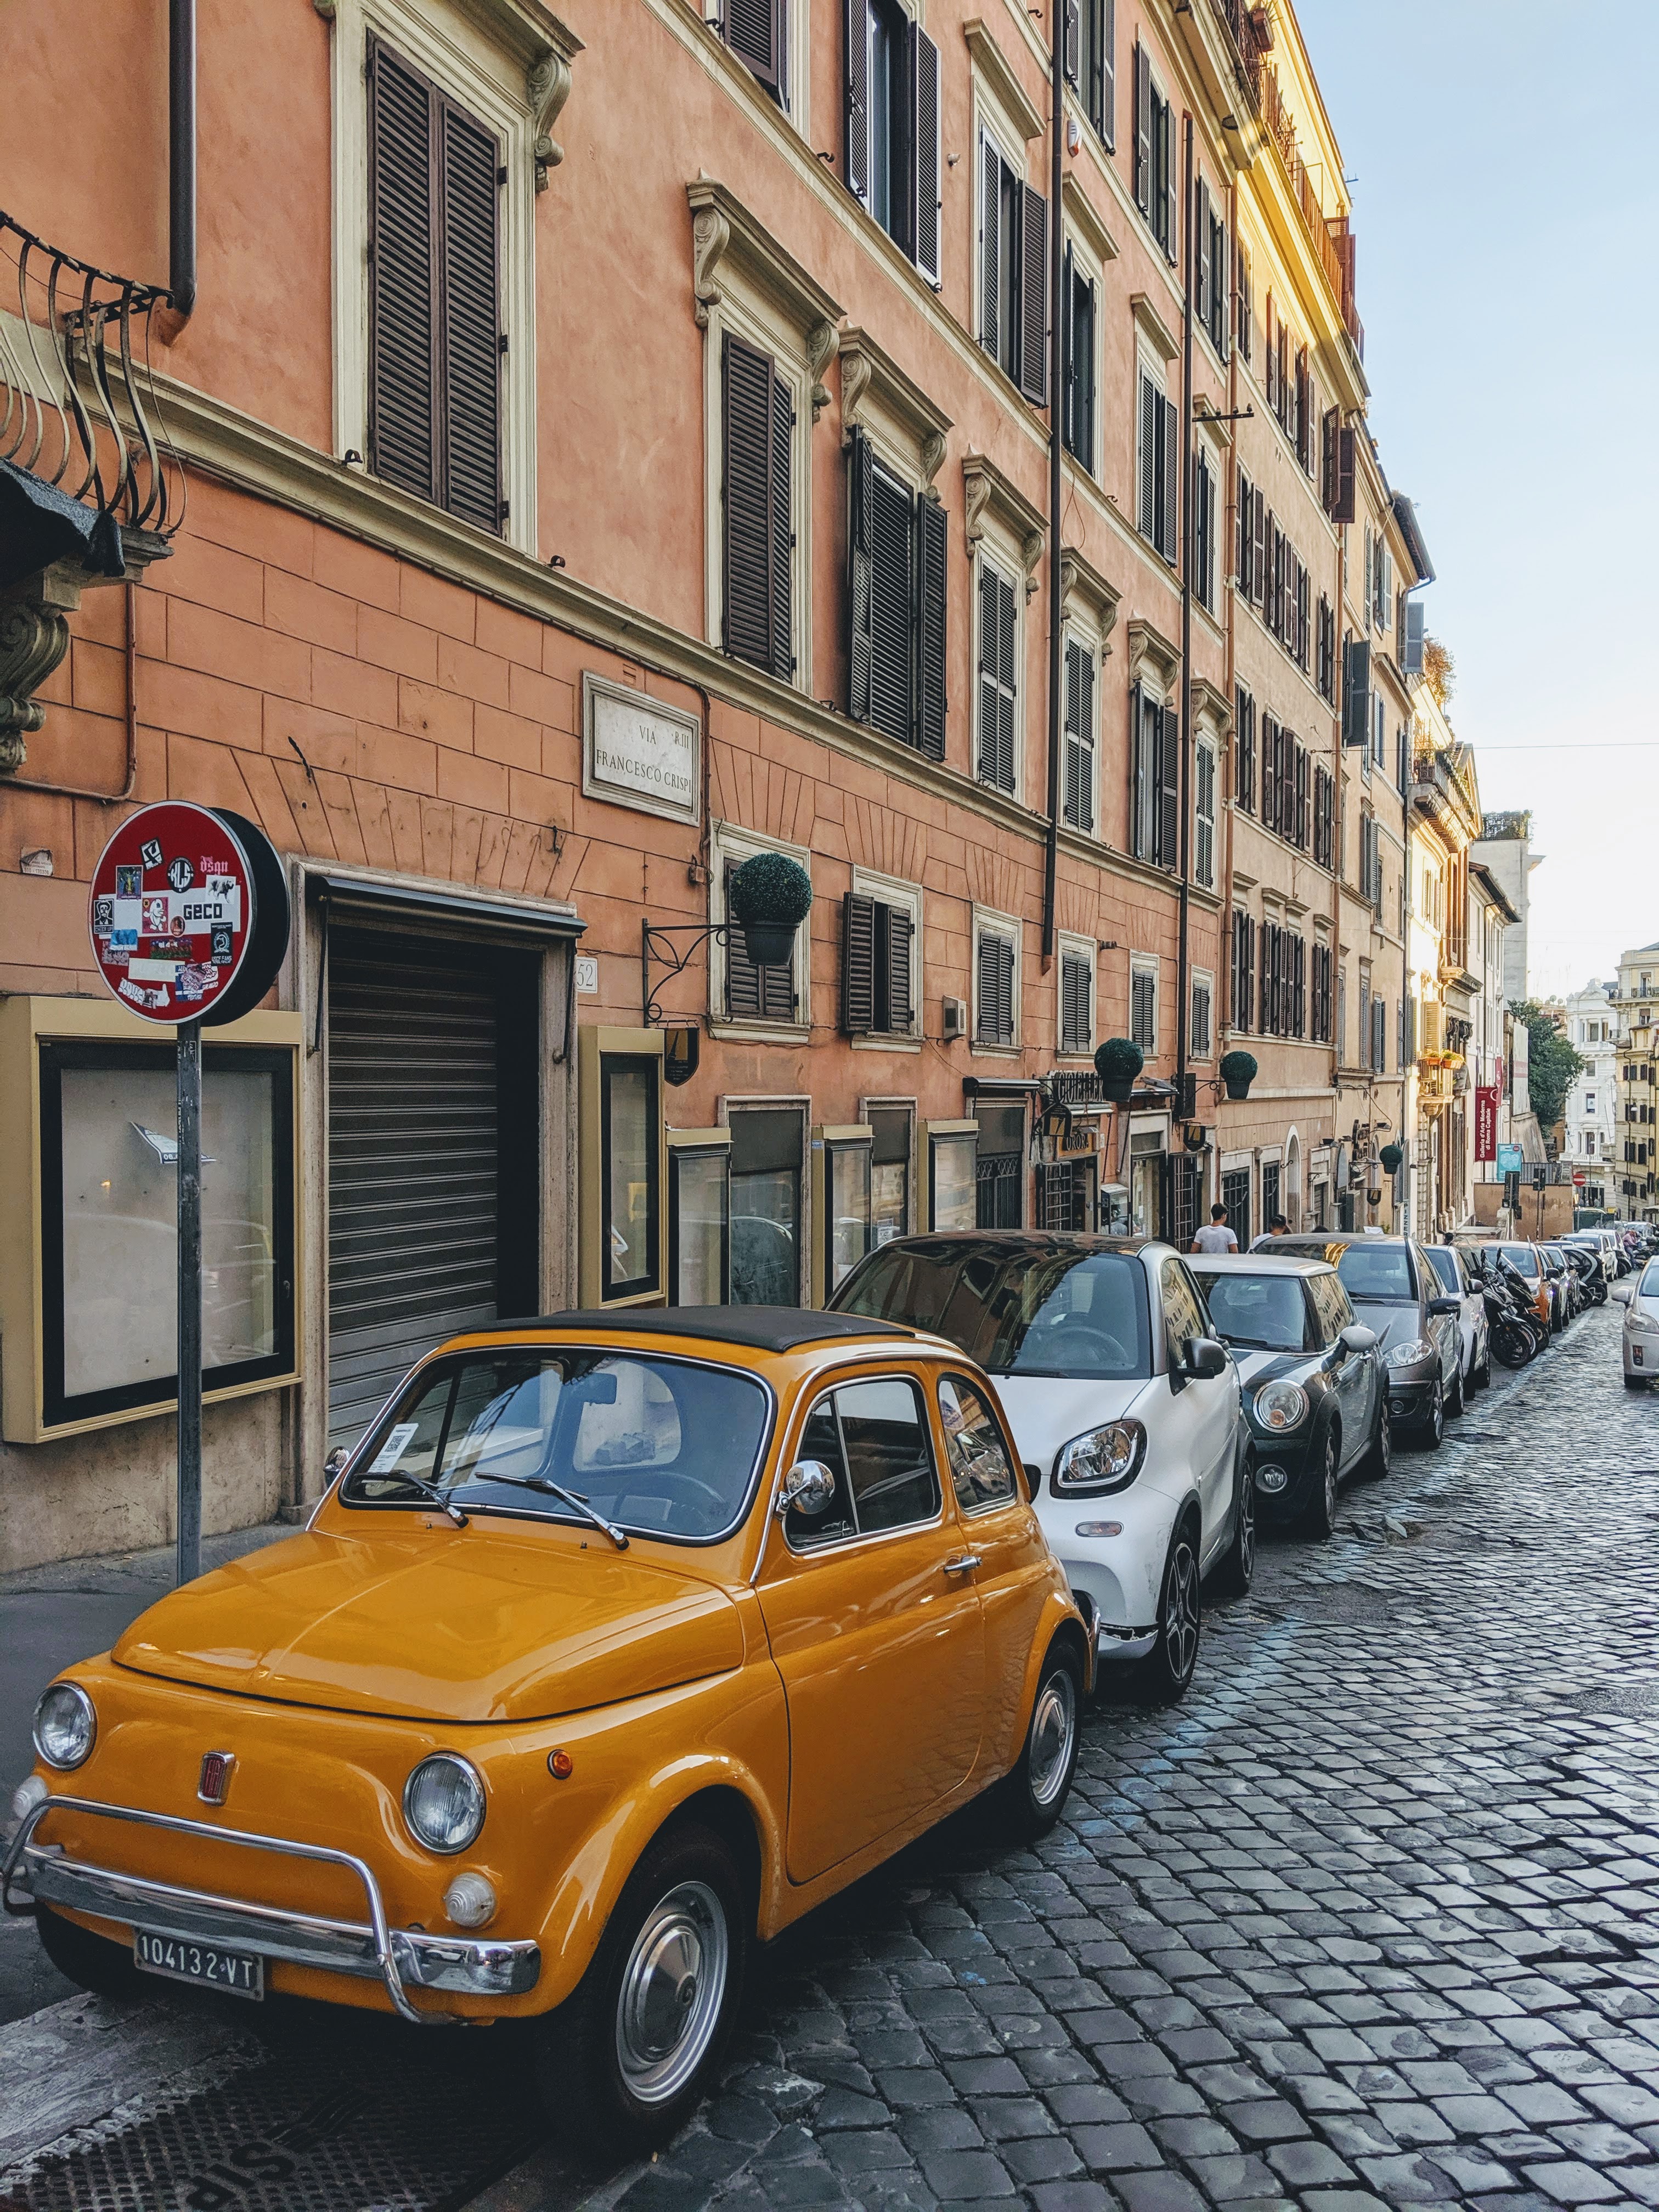 Fiat on a Street in Rome, Italy